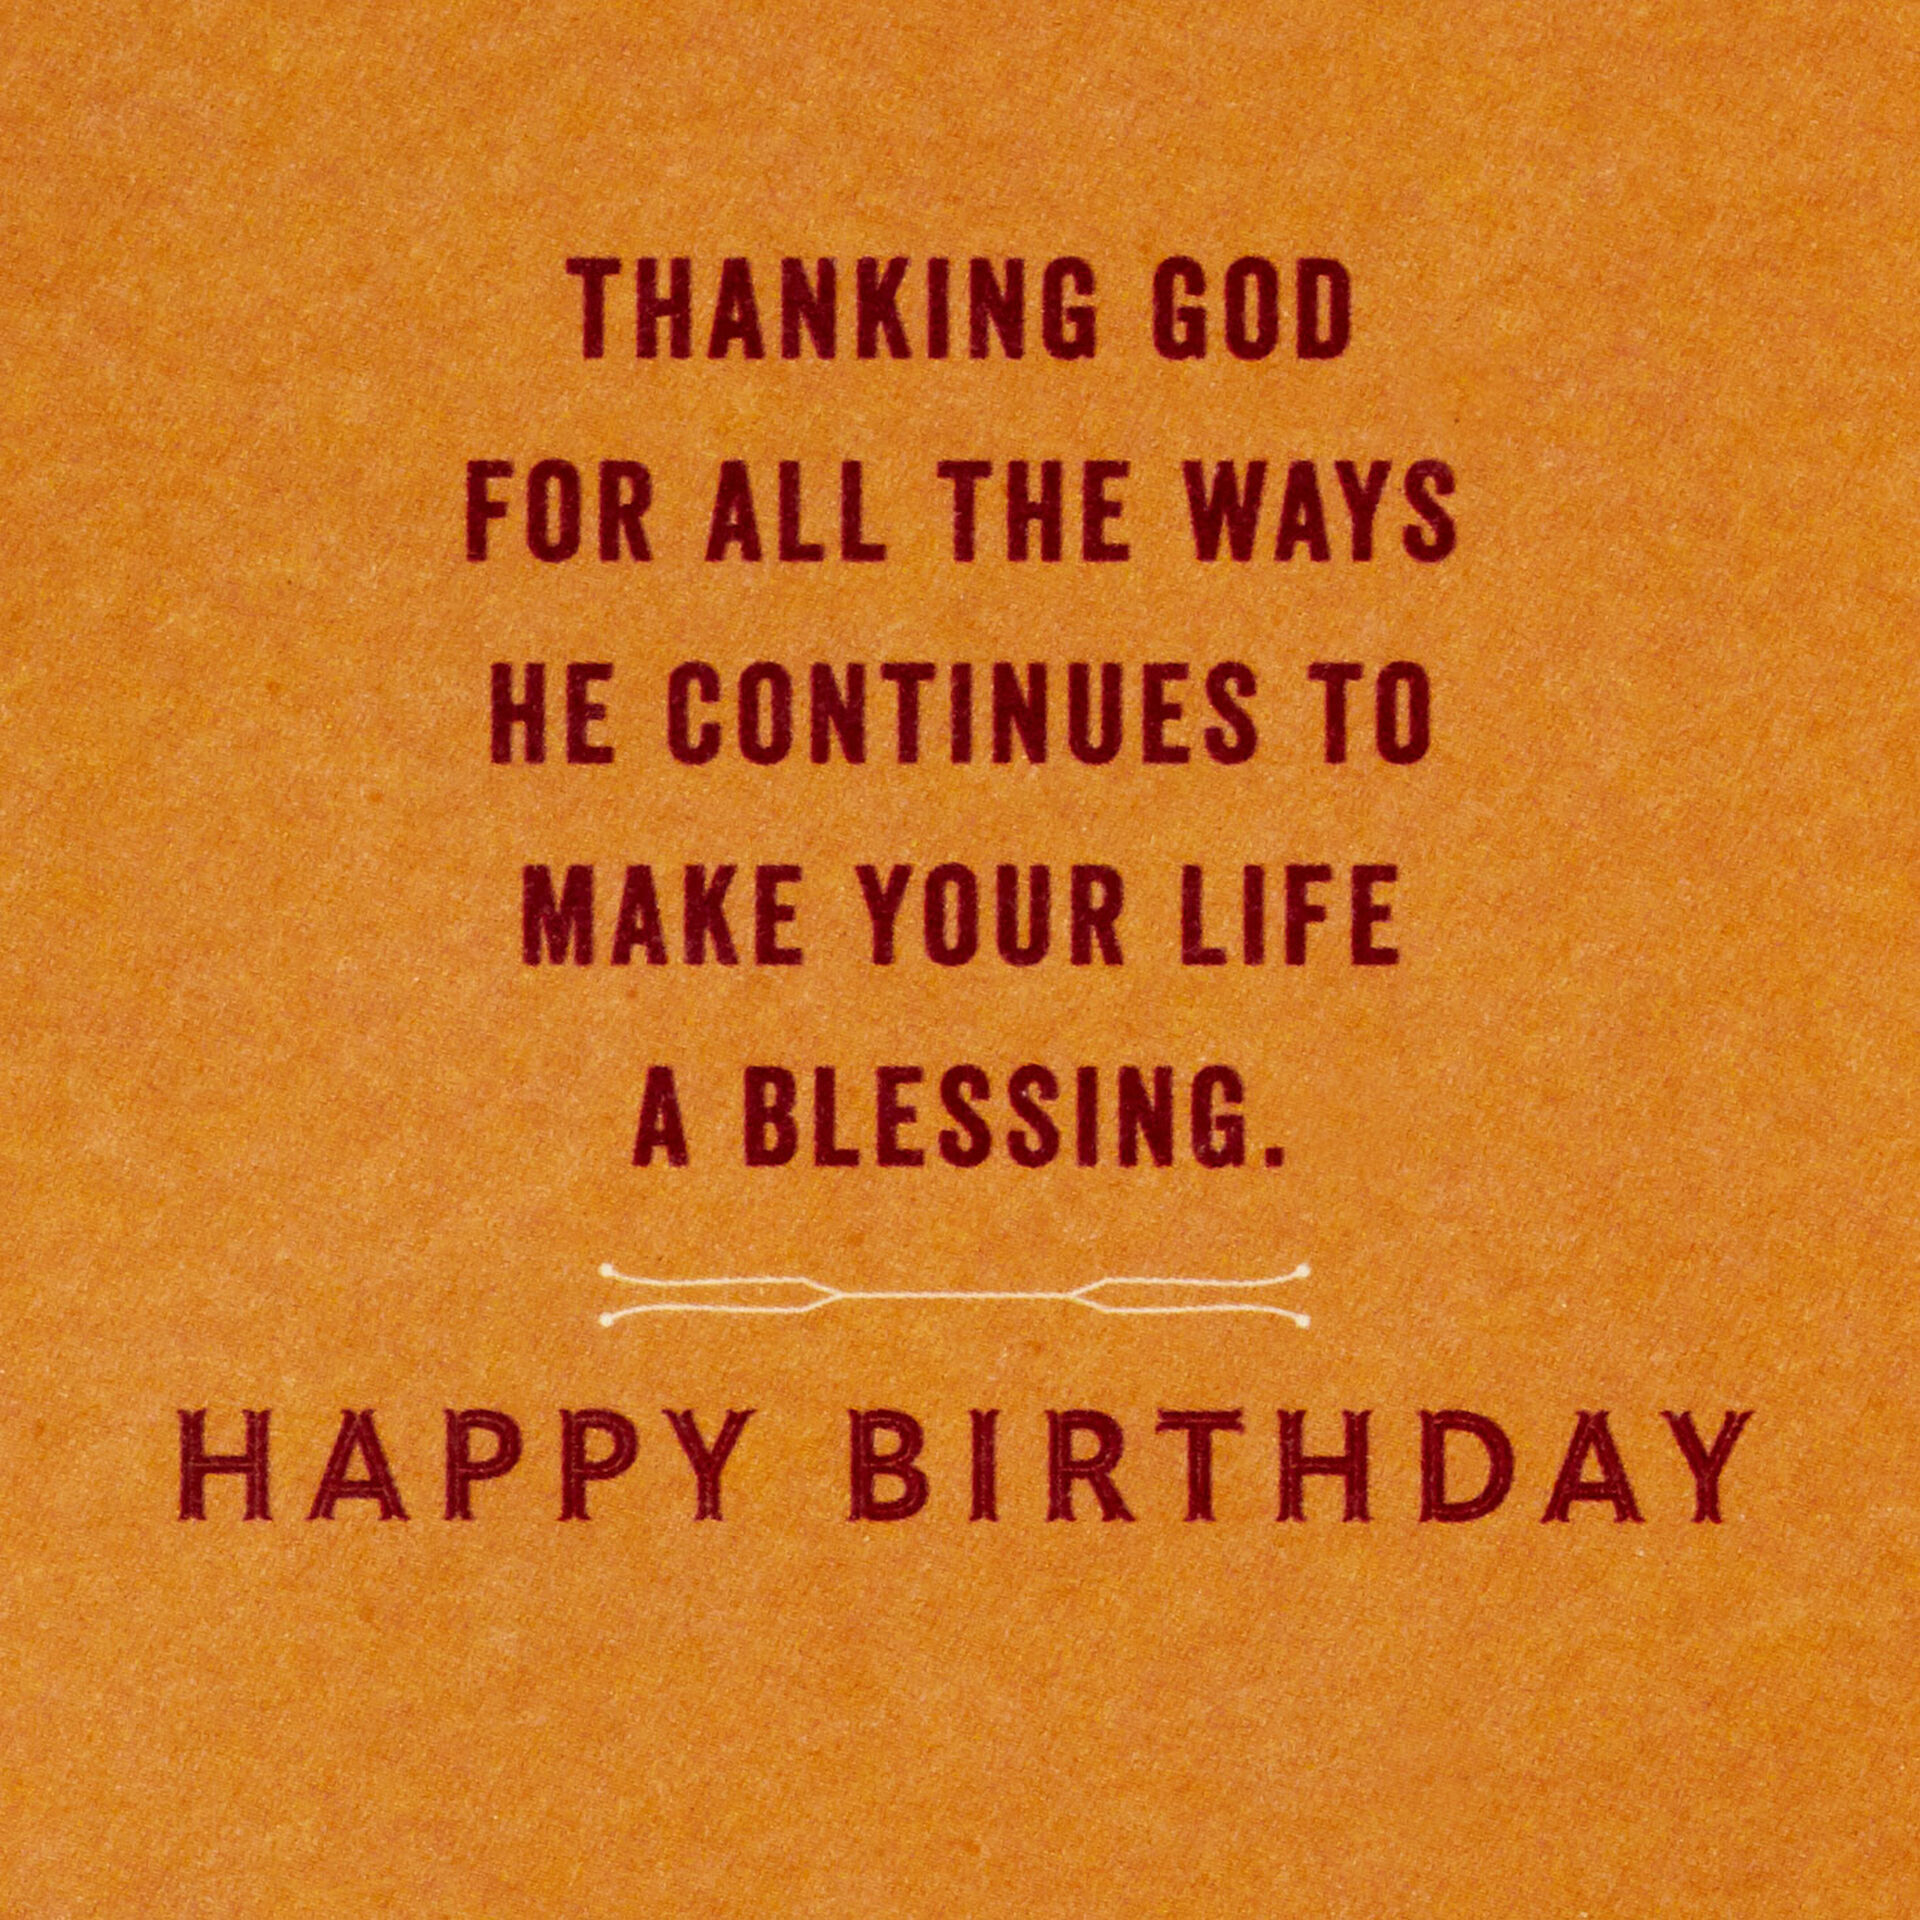 Candles-&-Patterns-Religious-Birthday-Card-for-Him_459CEY2803_02